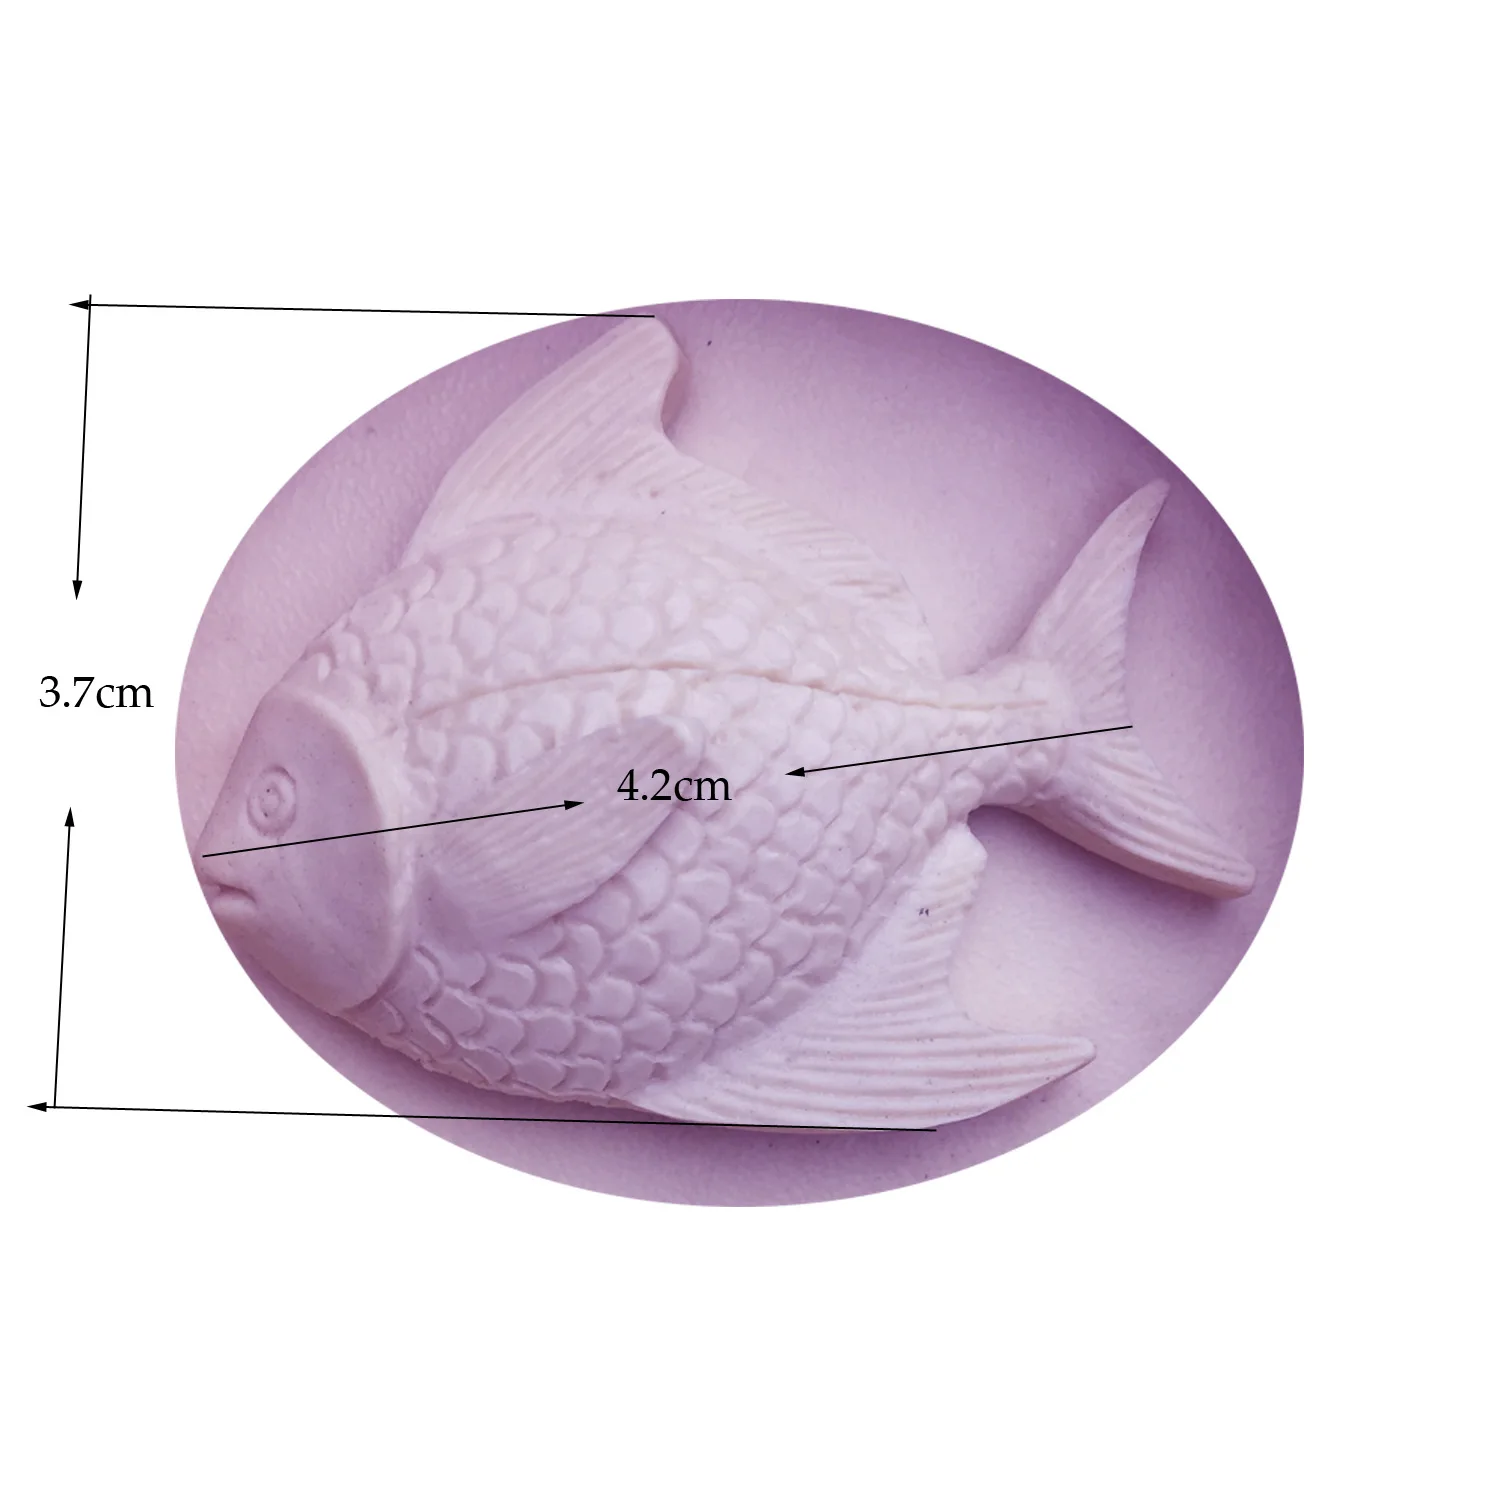 M0856 Animal Cartoon Fish Silicone Fondant Soap 3d Cake Mold Cupcake Jelly  Candy Chocolate Decoration Baking Tool Moulds - Cake Tools - AliExpress